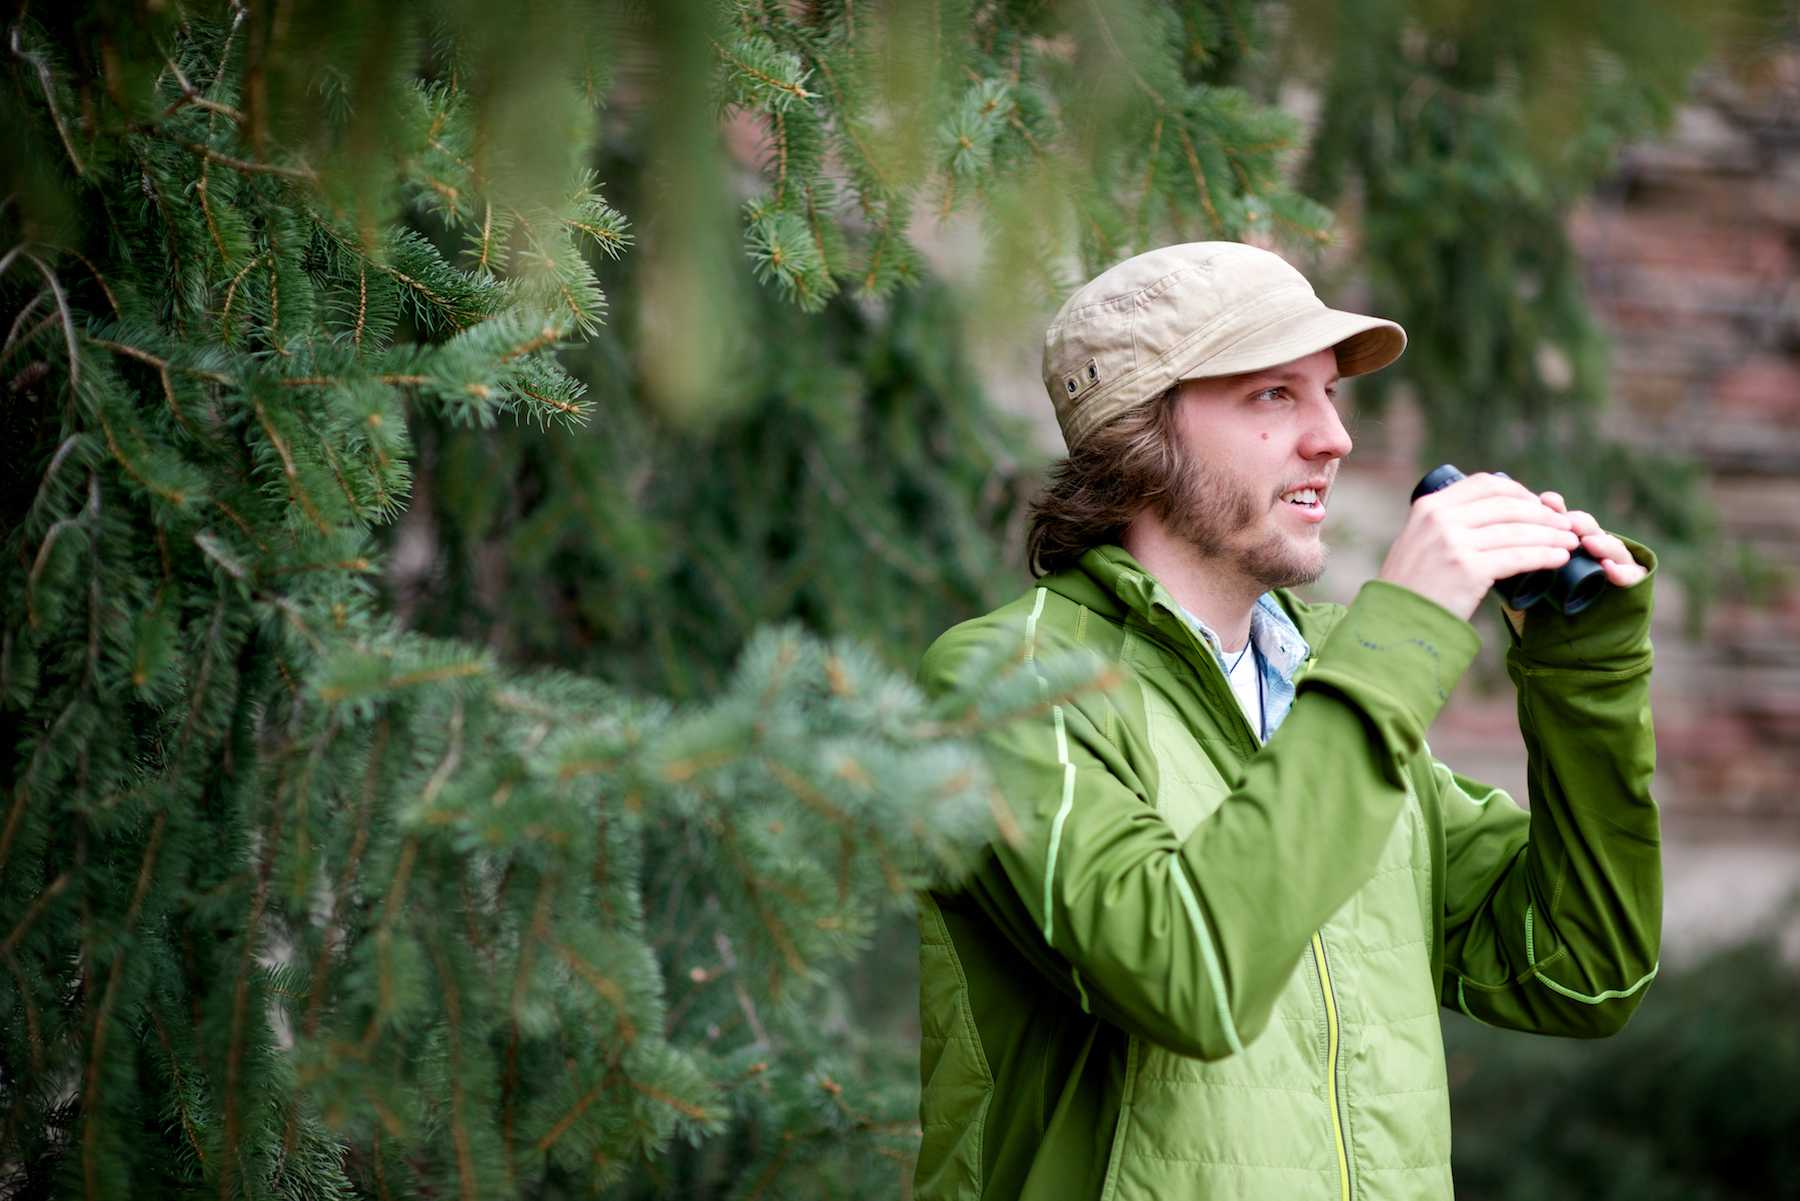 Adam miller, a senior wildlife biology major, uses binoculars to identify birds from their site and call in the Monfort Quadrangle. Miller has been involved in undergraduate research since freshman year and is currently studying how housing development affects bird nesting patterns.